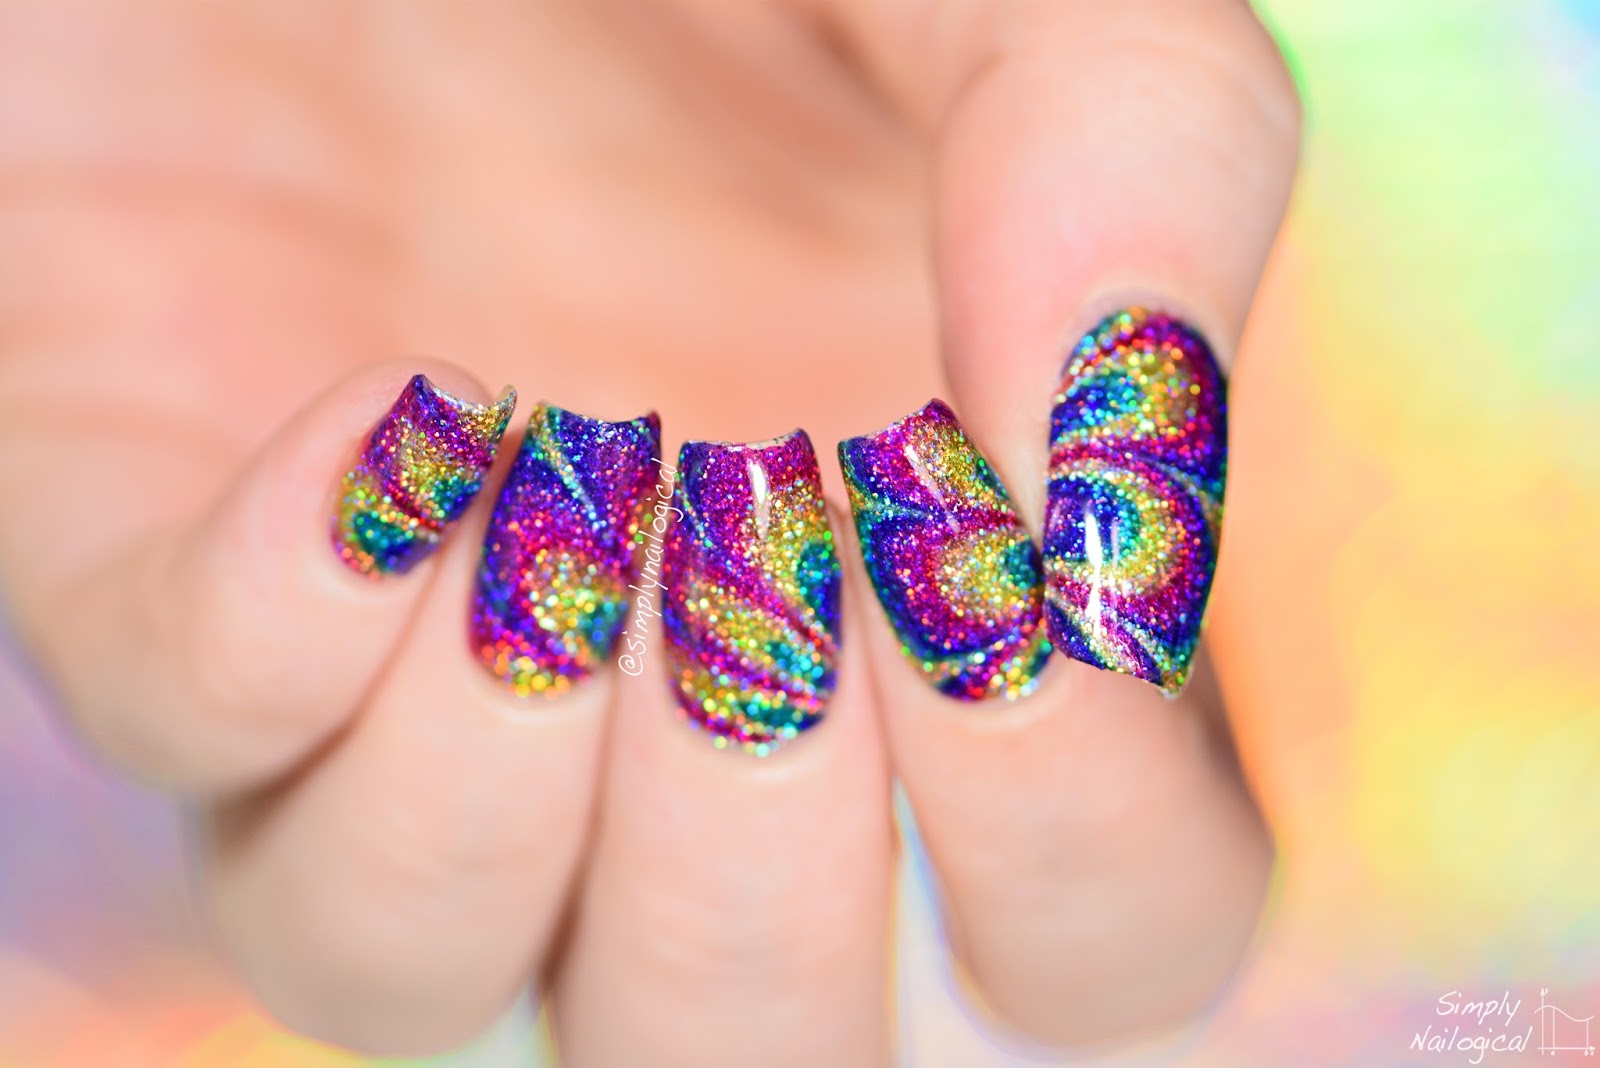 7. "Nail Art for Beginners" by Simply Nailogical - wide 10